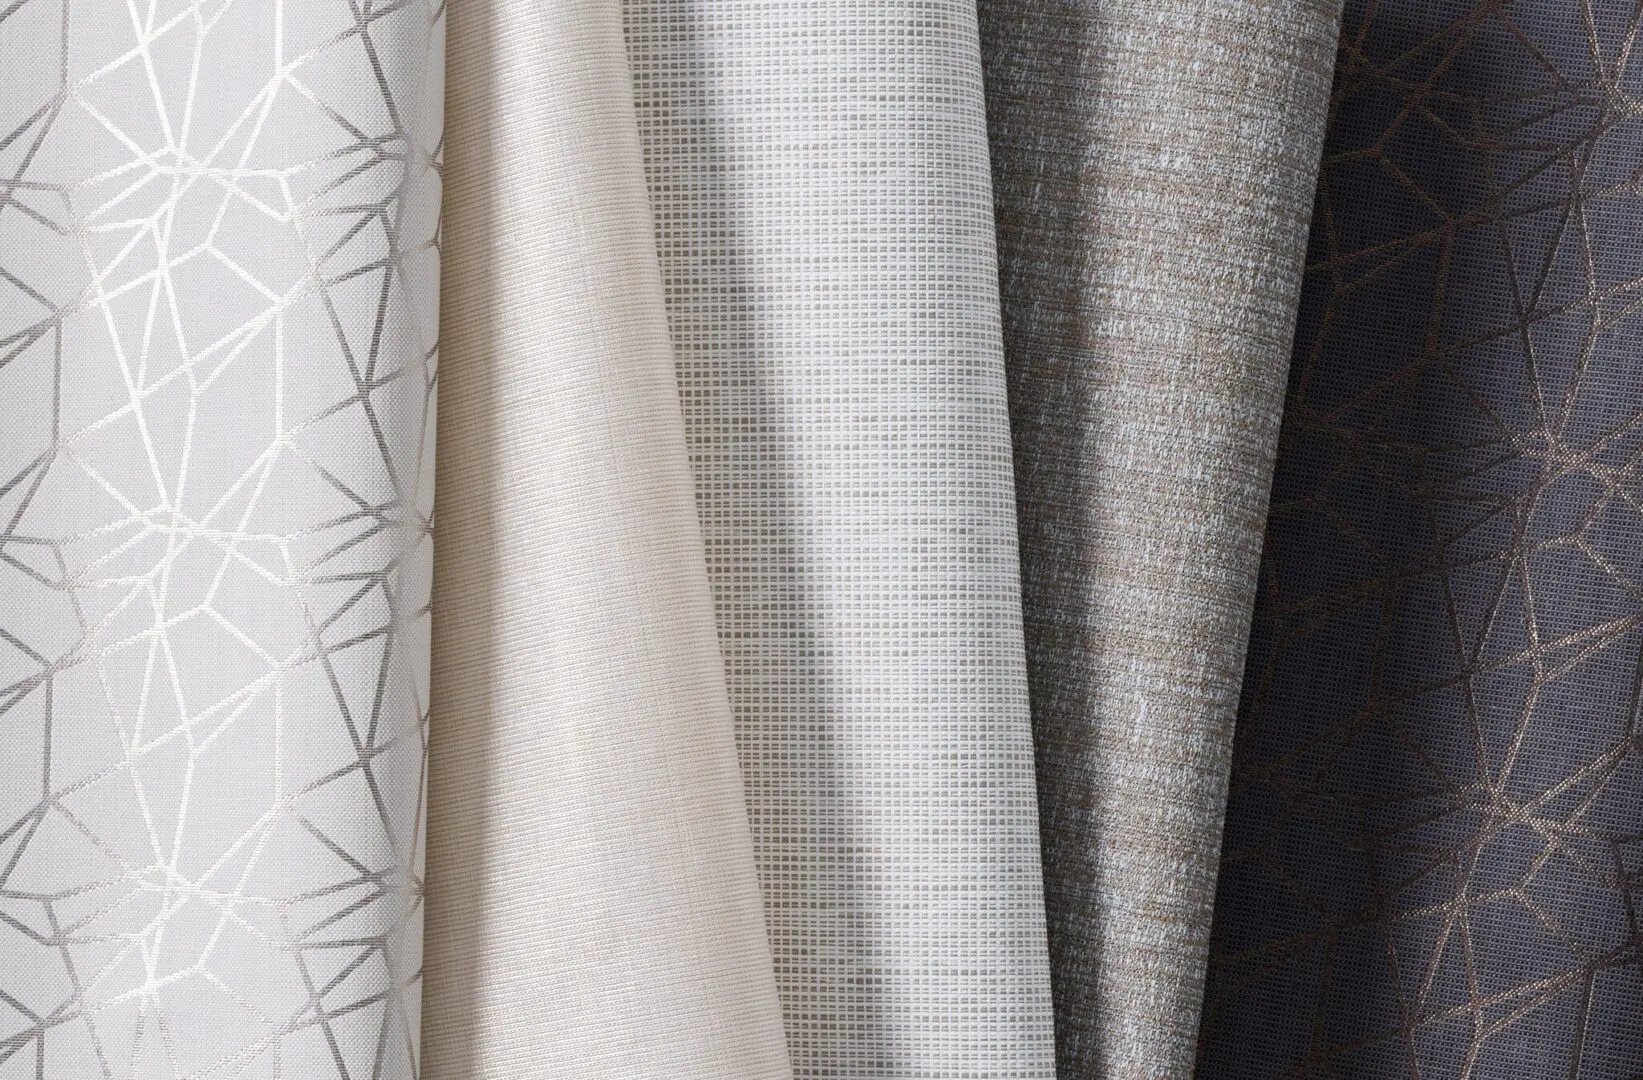 A close up of different types of fabric